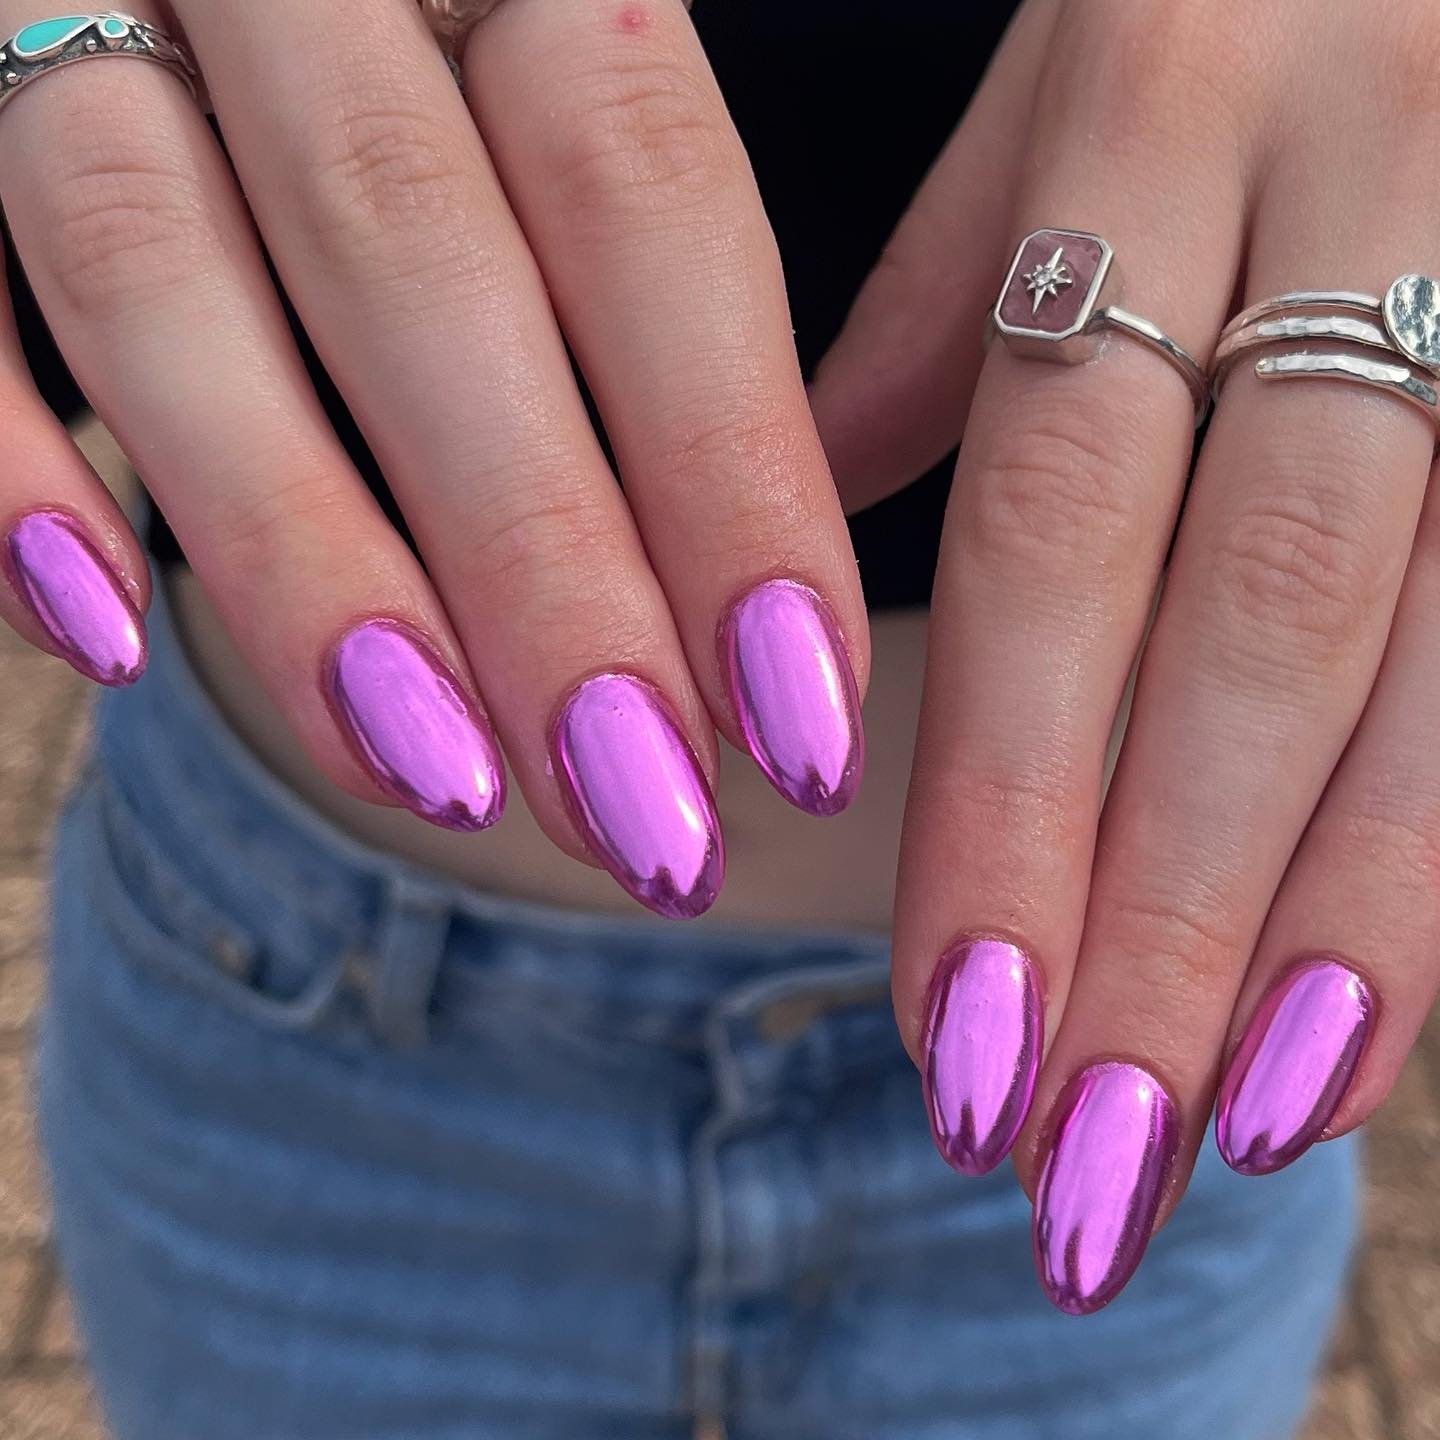 6 - Picture of Pink Chrome Nails